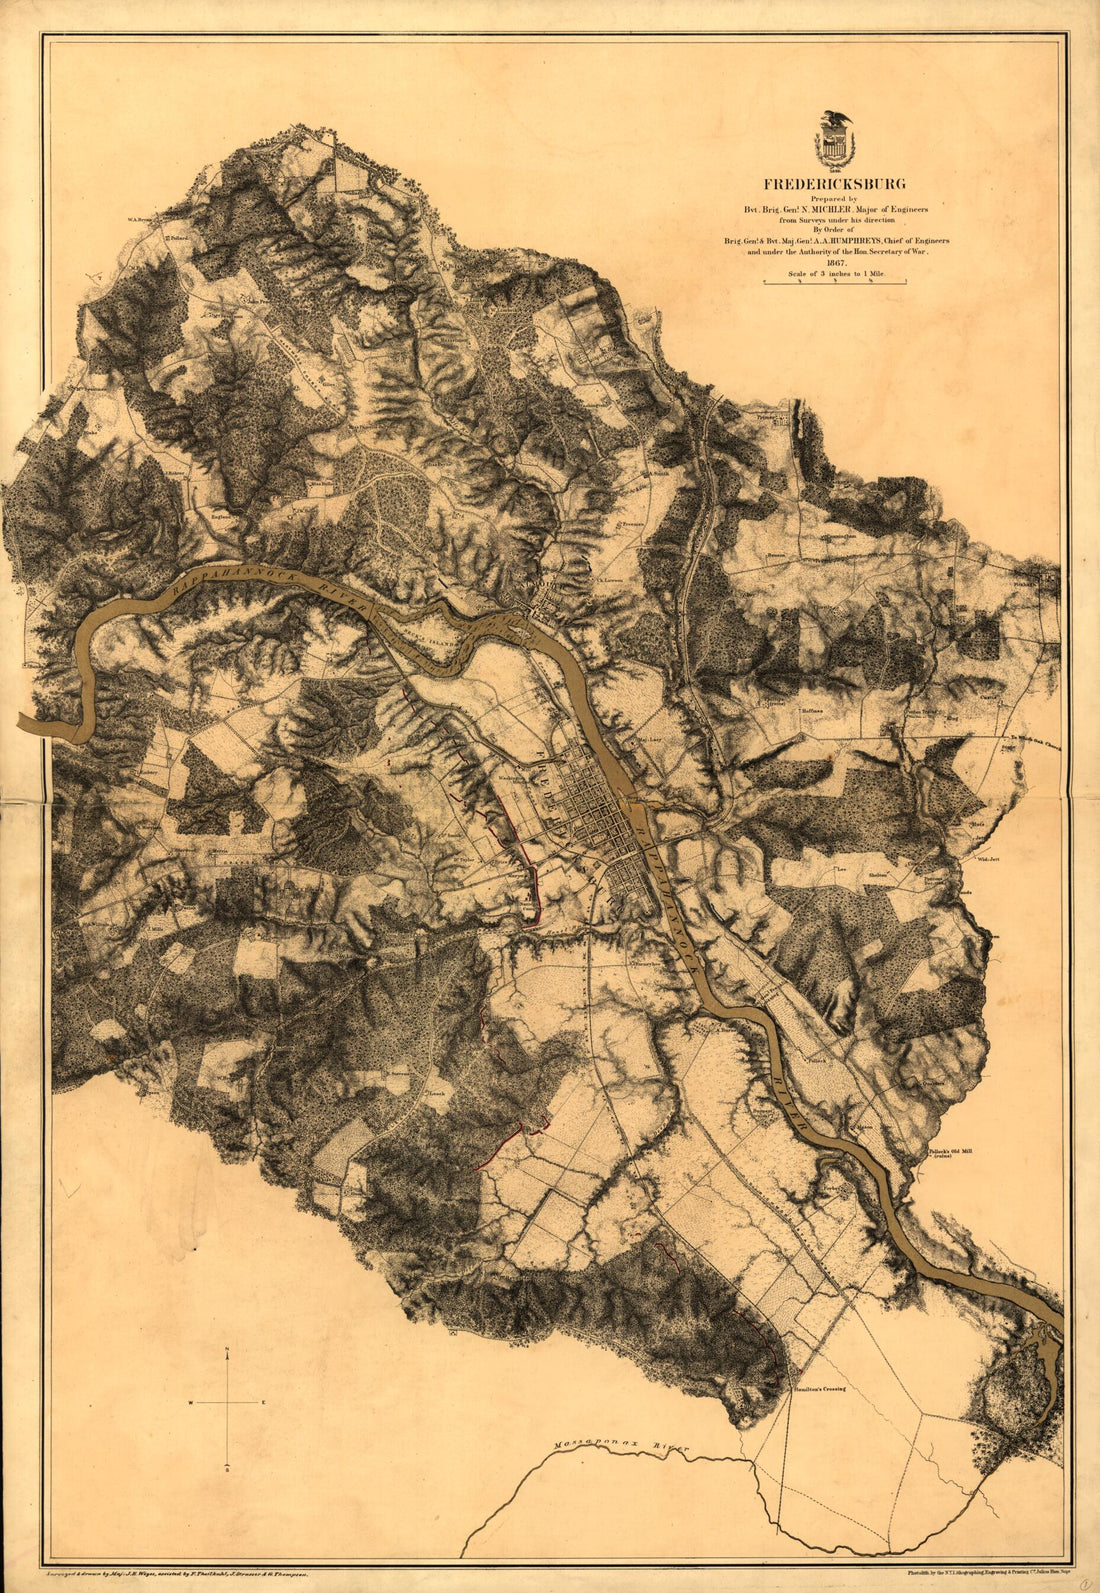 This old map of Fredericksburg. Dec. 1862 from 1867 was created by N. (Nathaniel) Michler in 1867